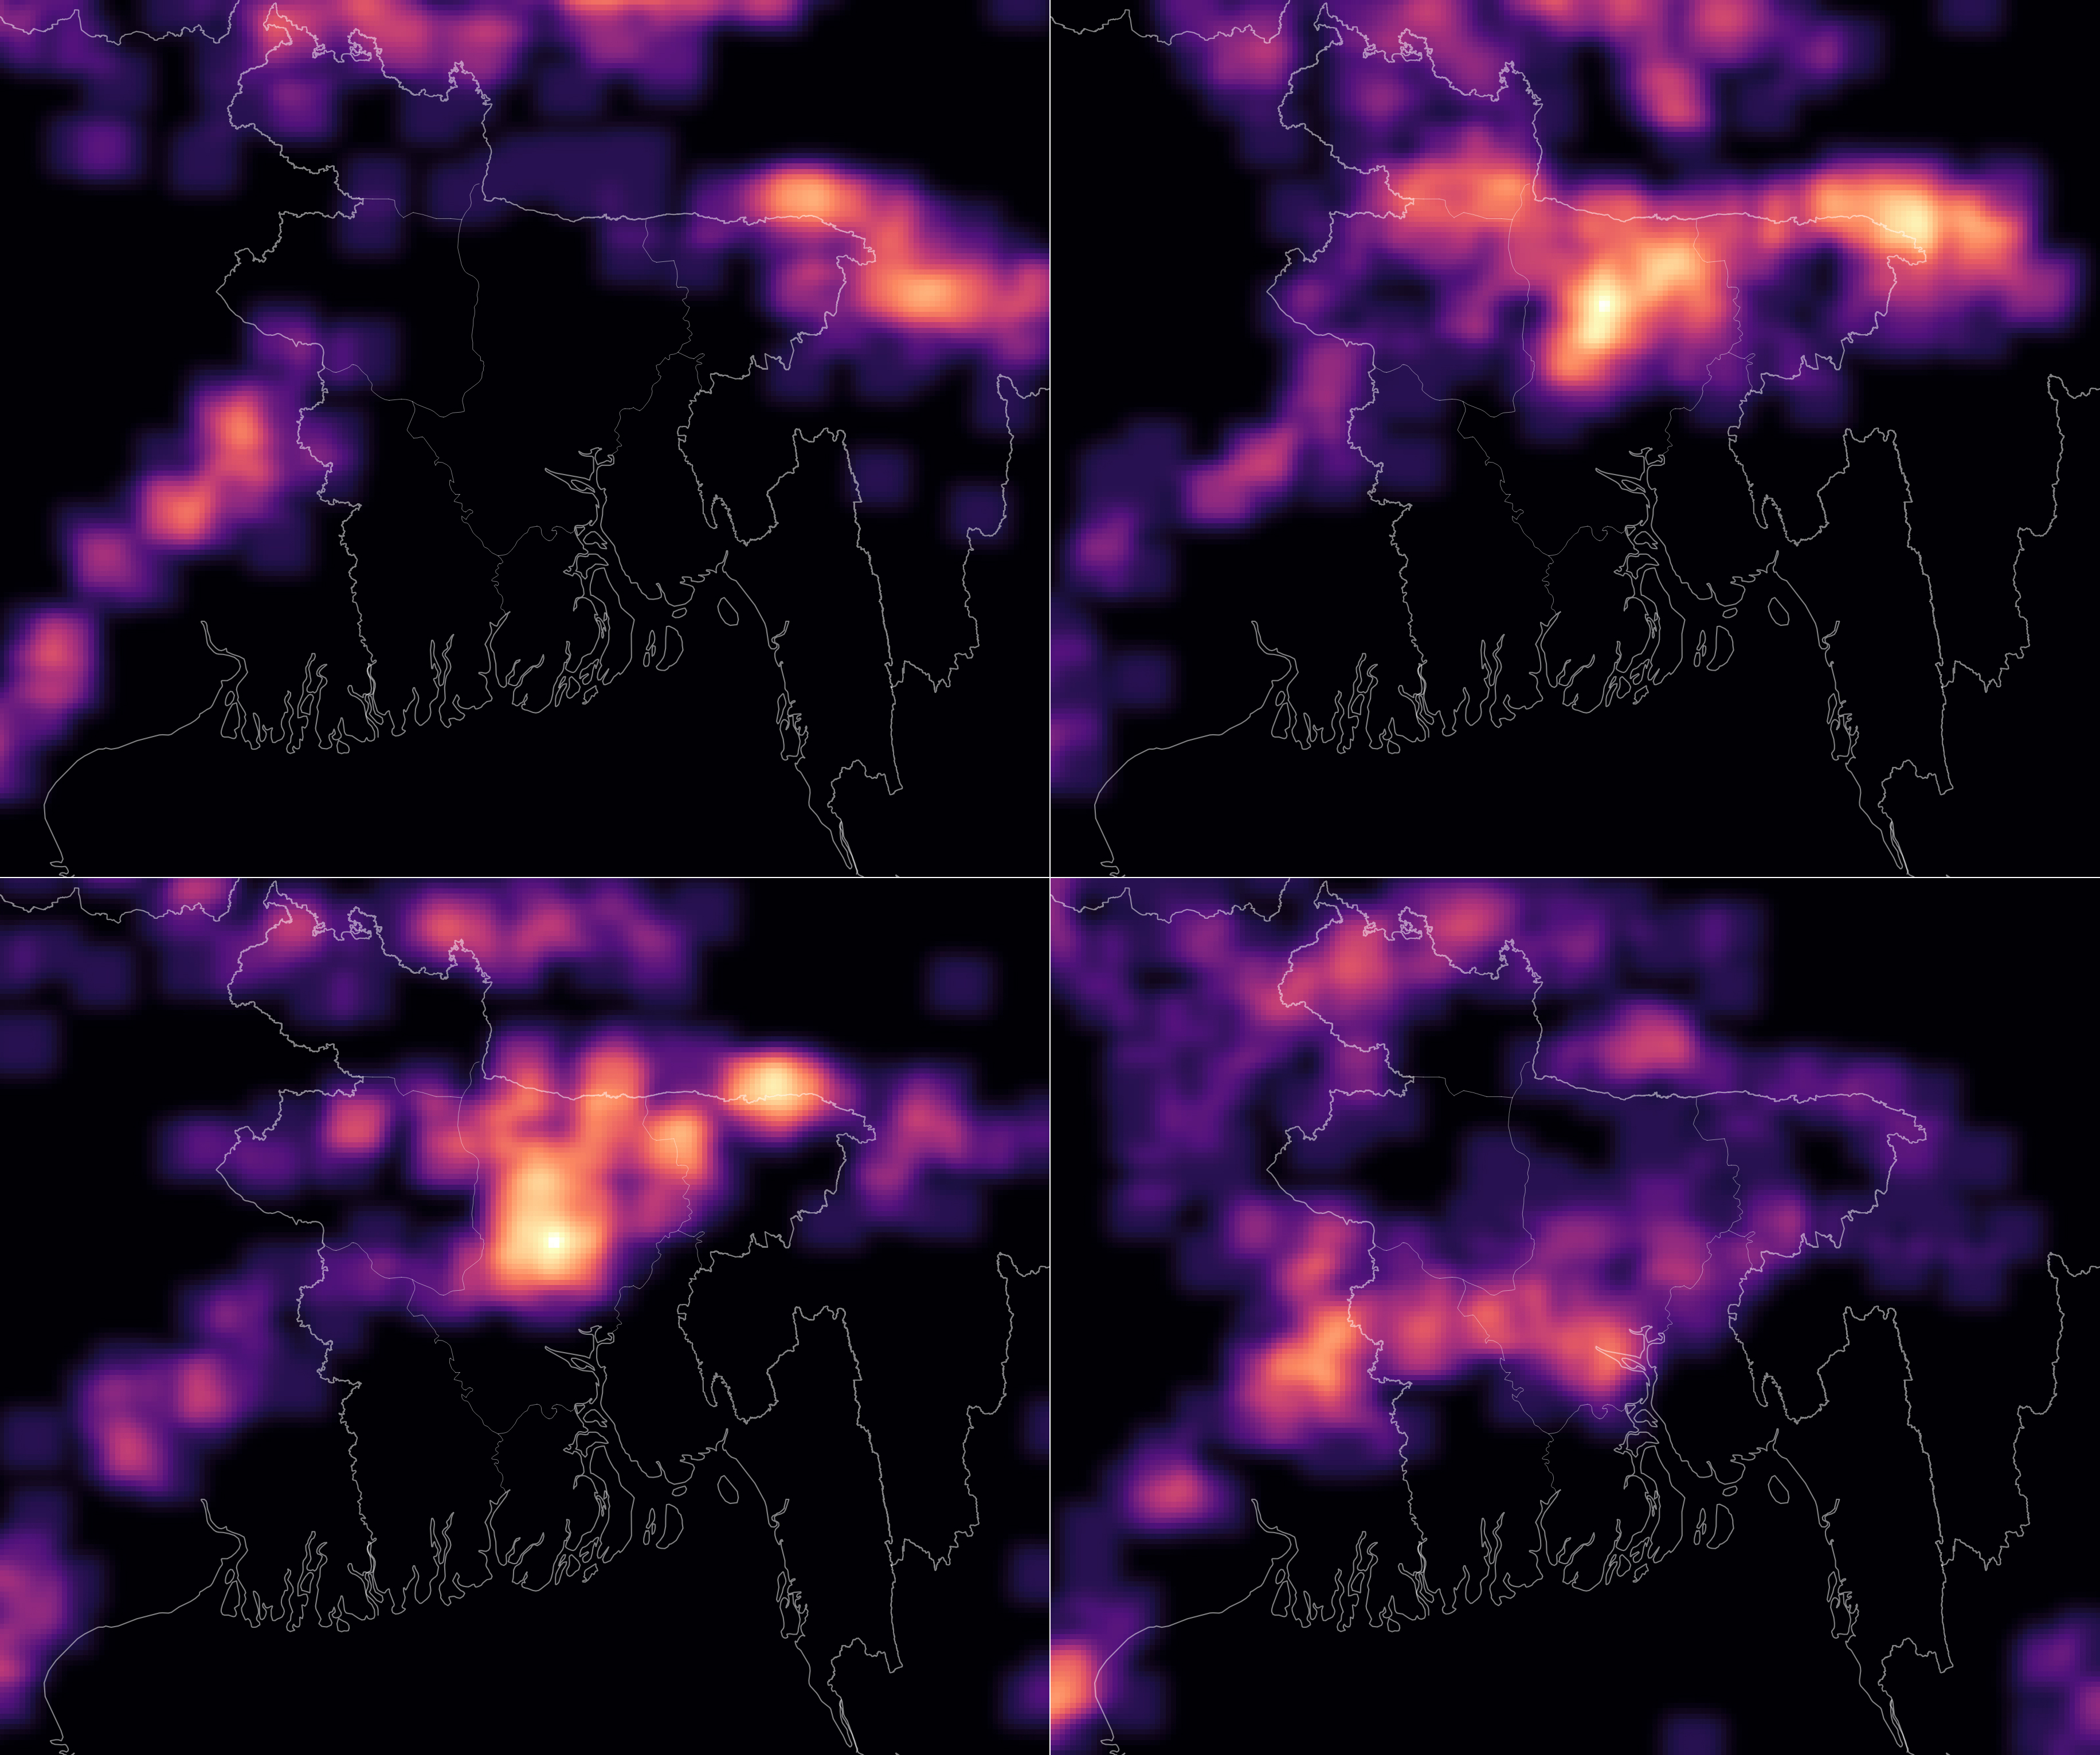 NASA Data Supercharges Forecasting in Bangladesh - related image preview